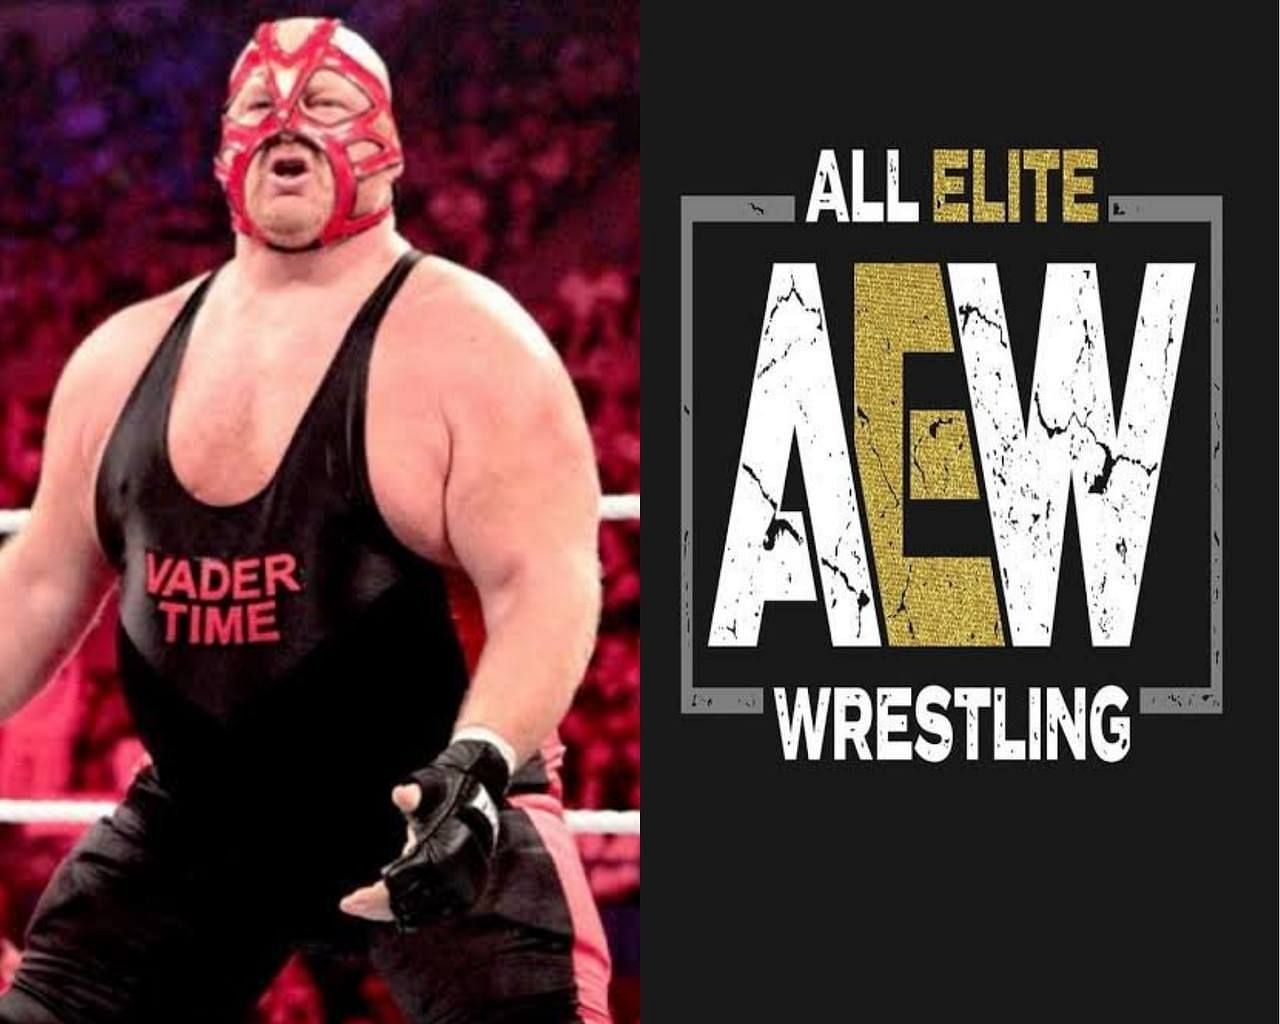 Dustin Rhodes reminisced about working with Big Van Vader